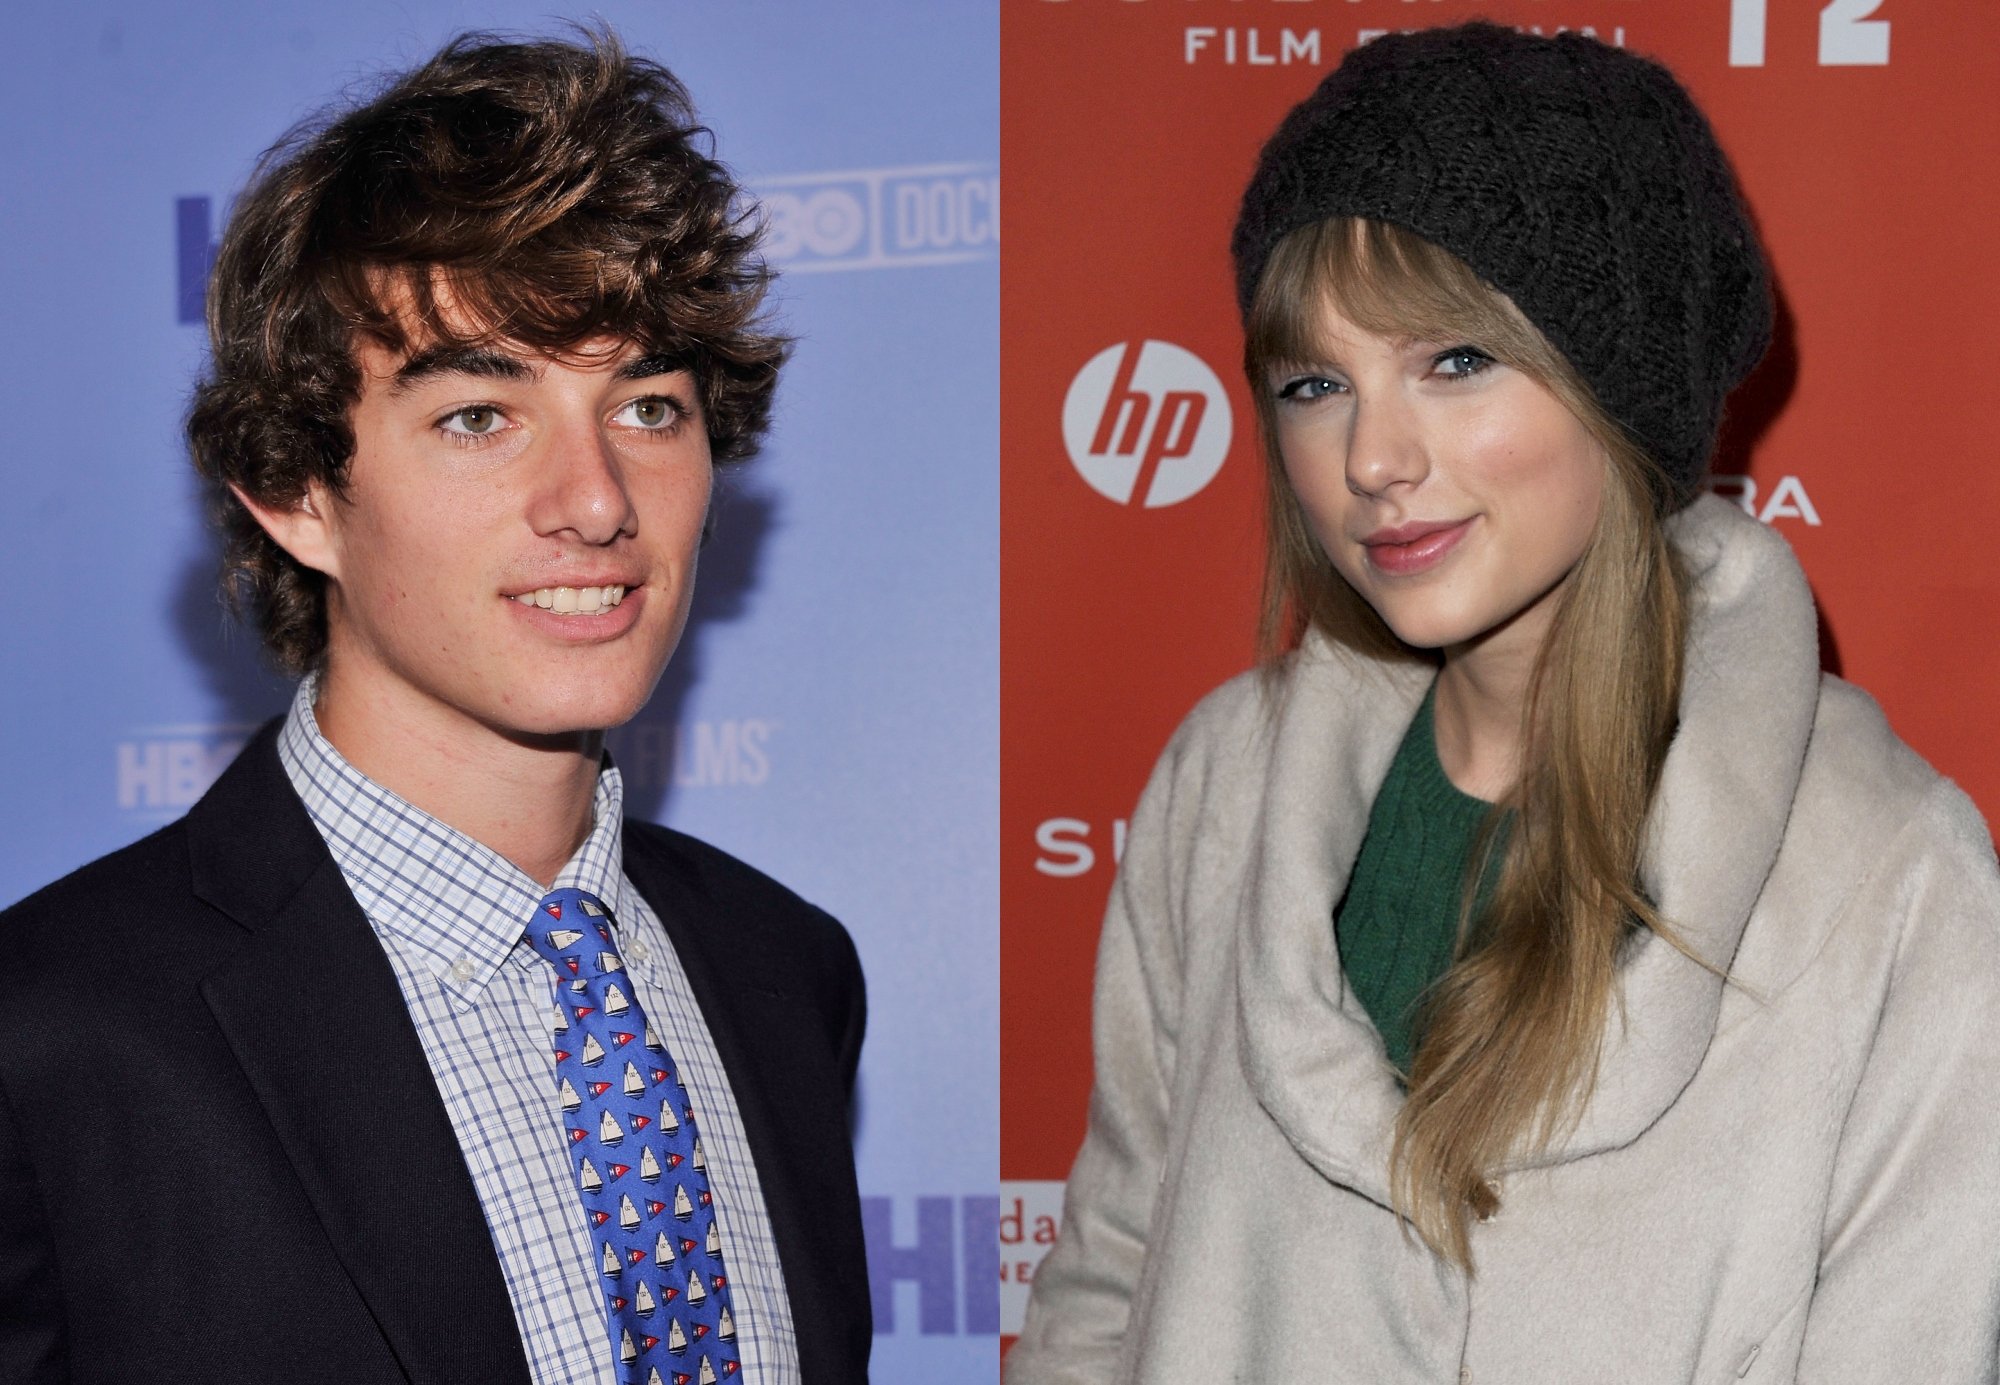 Conor Kennedy and Taylor Swift composite